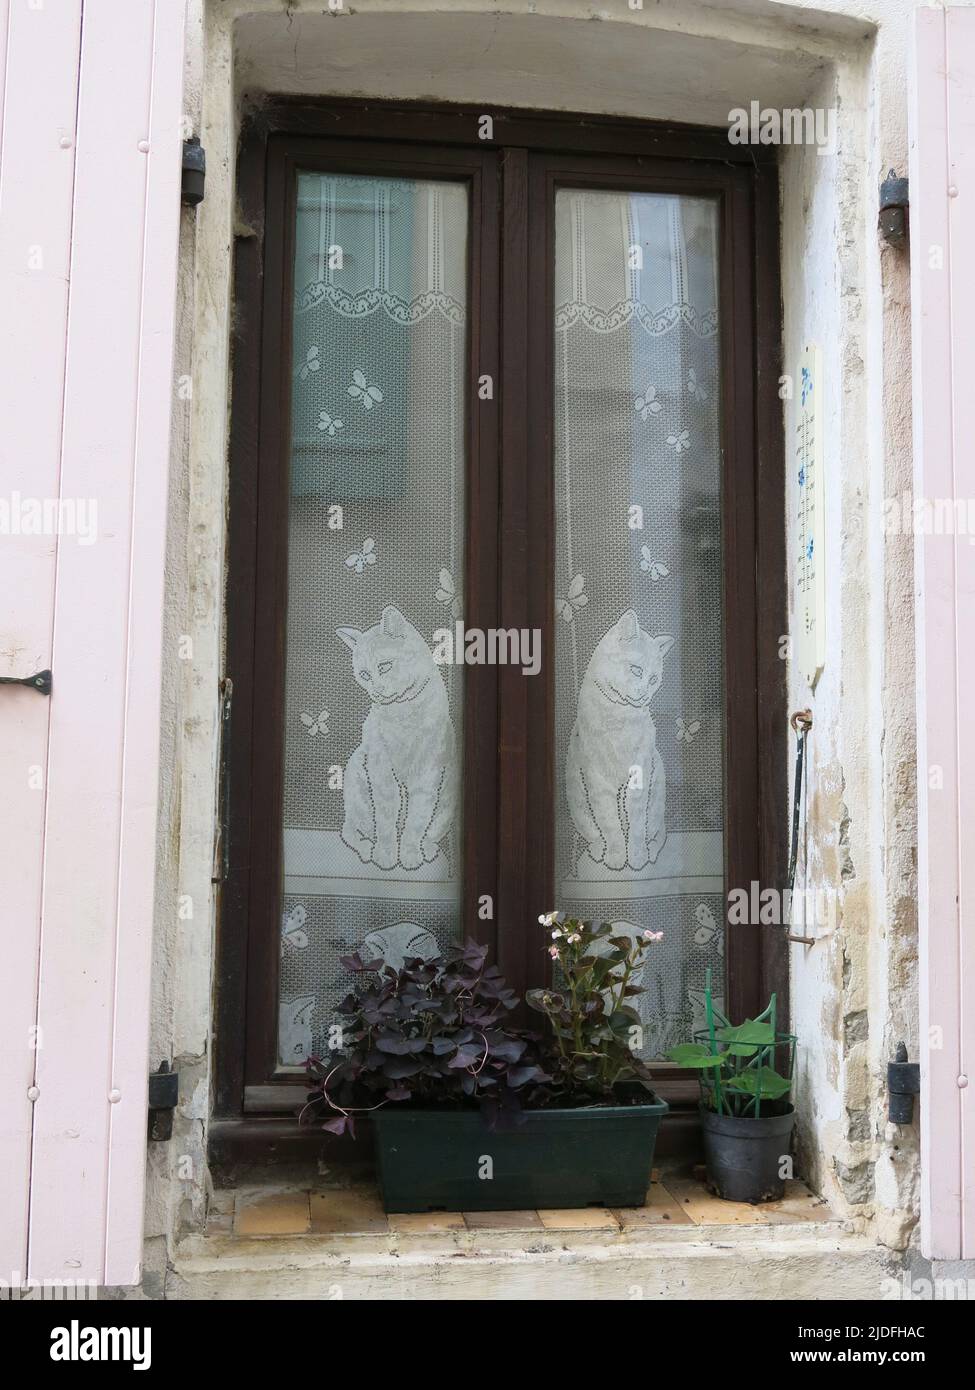 A quaint window in an old French house with a pair of cats on the voile curtains and a window-box on the sill. Stock Photo